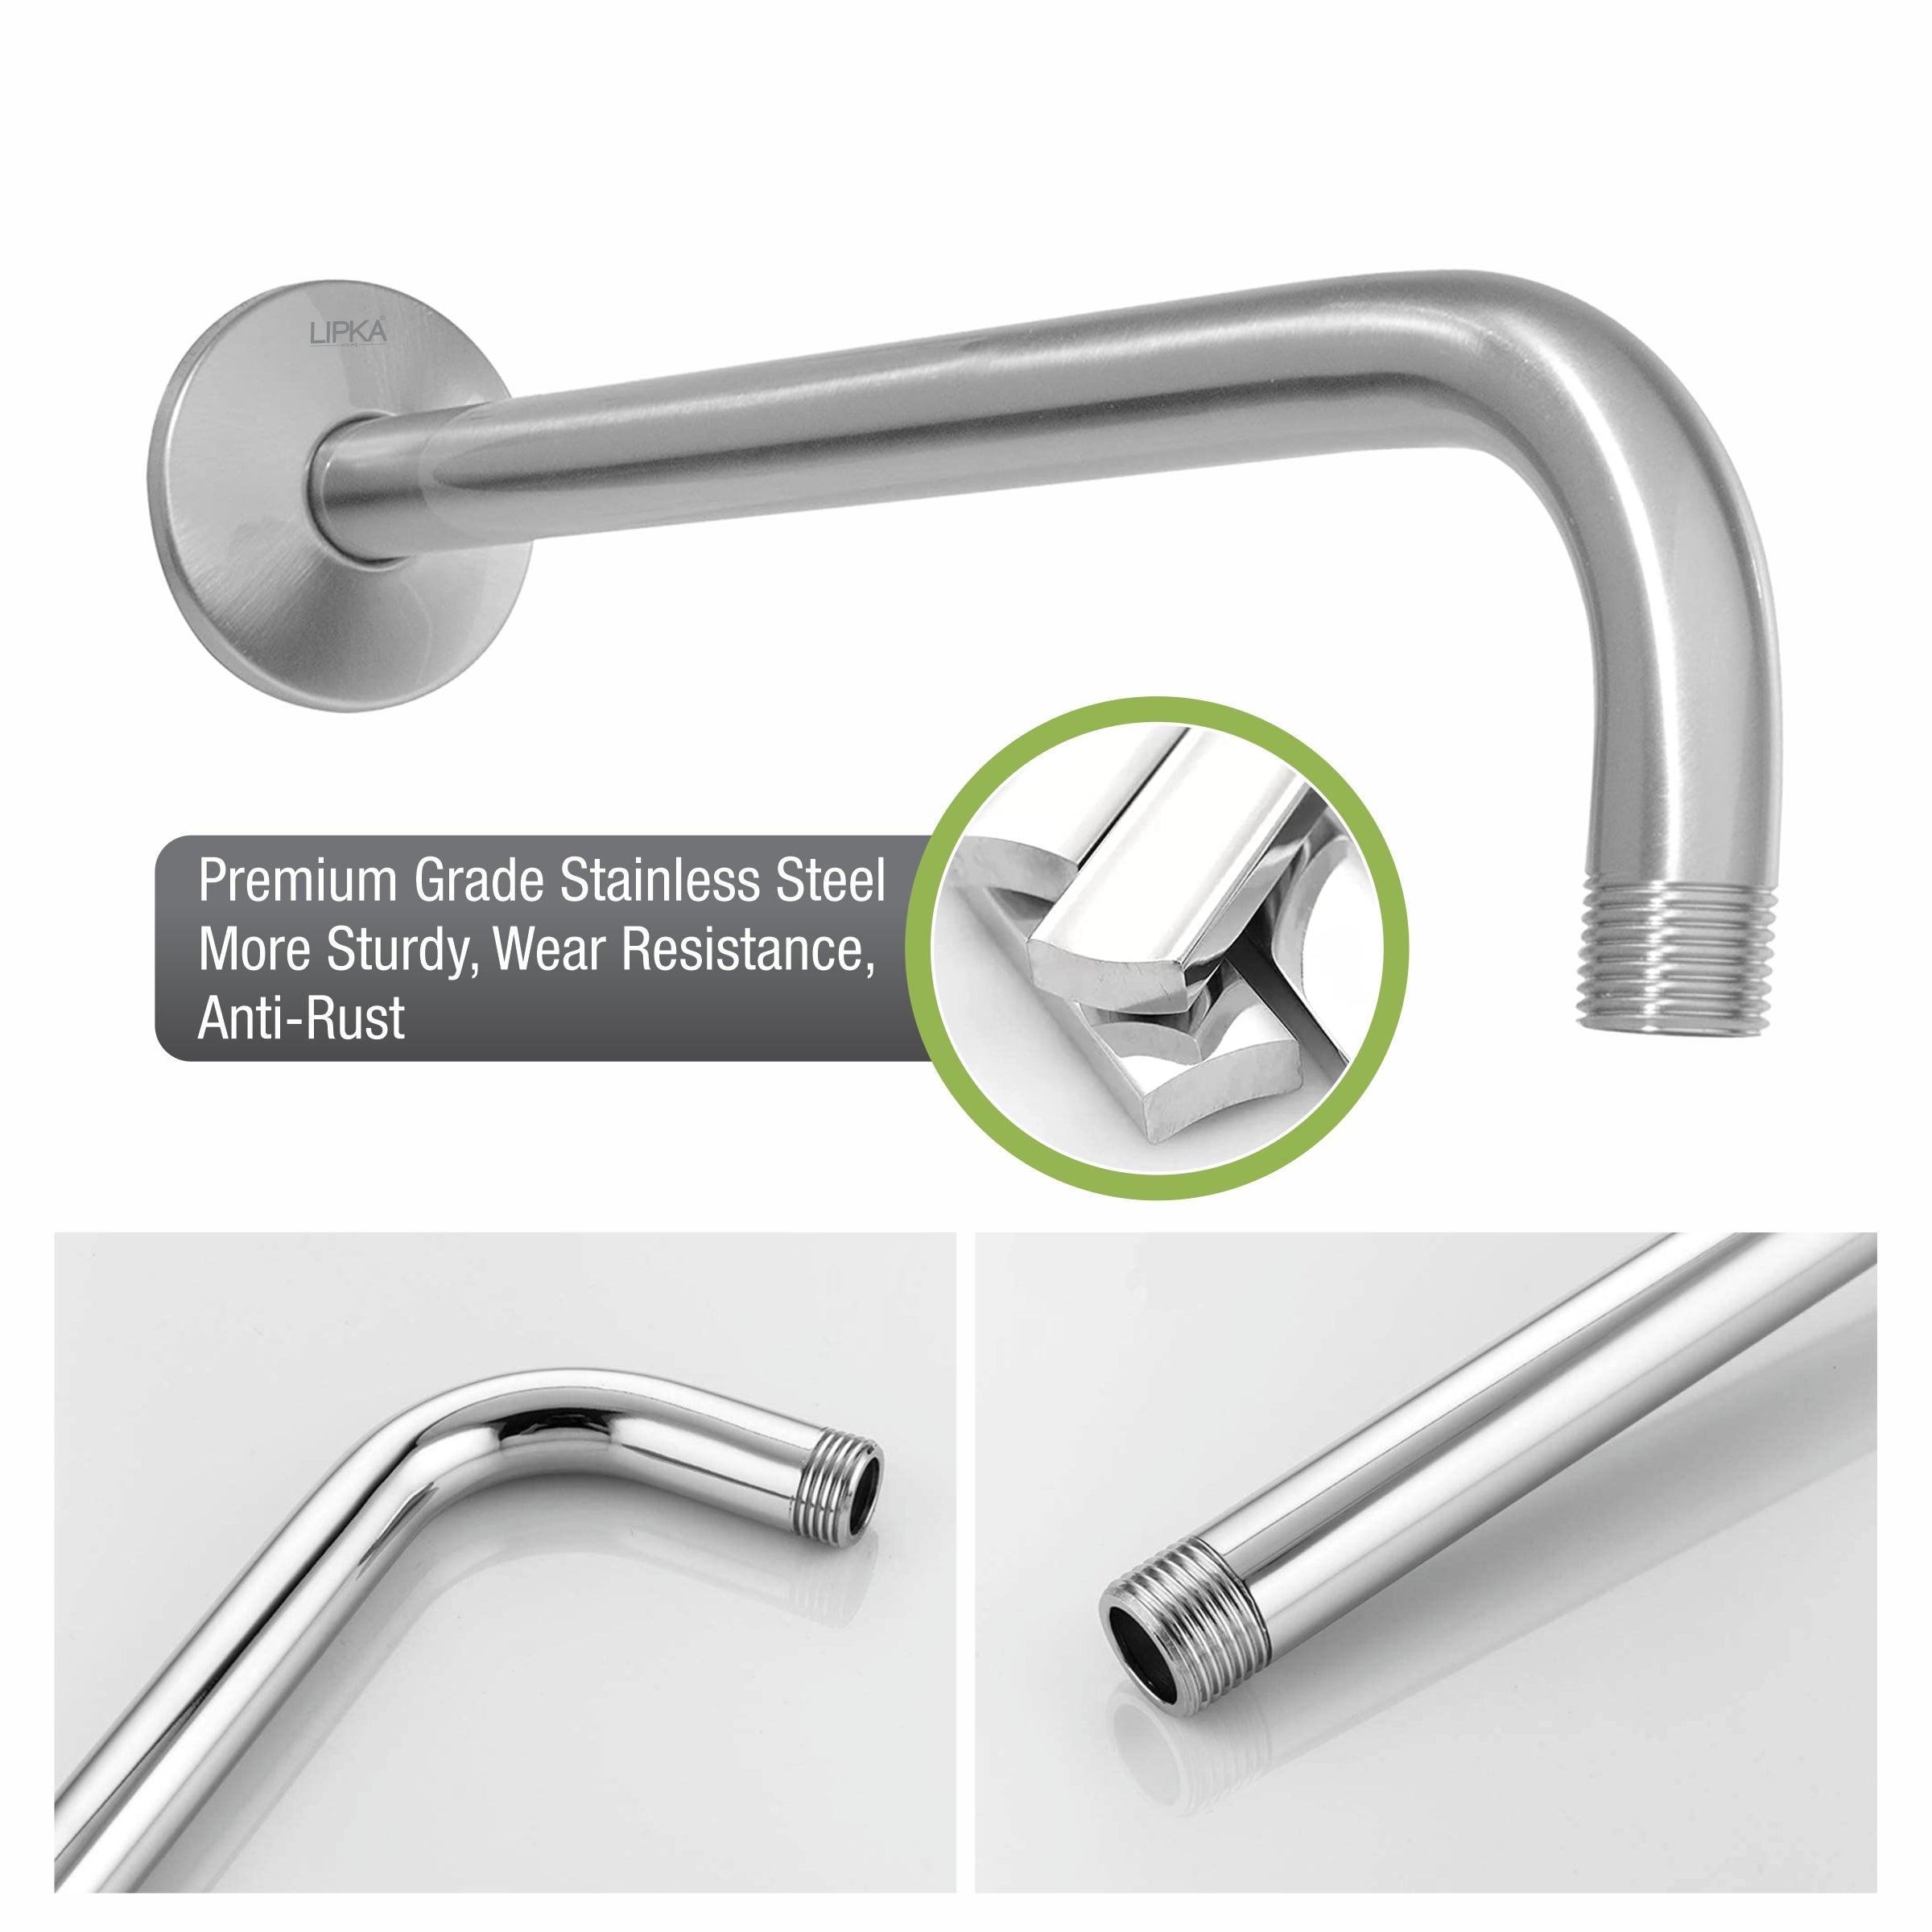 Full Bend Round Shower Arm (15 Inches) premium stainless steel